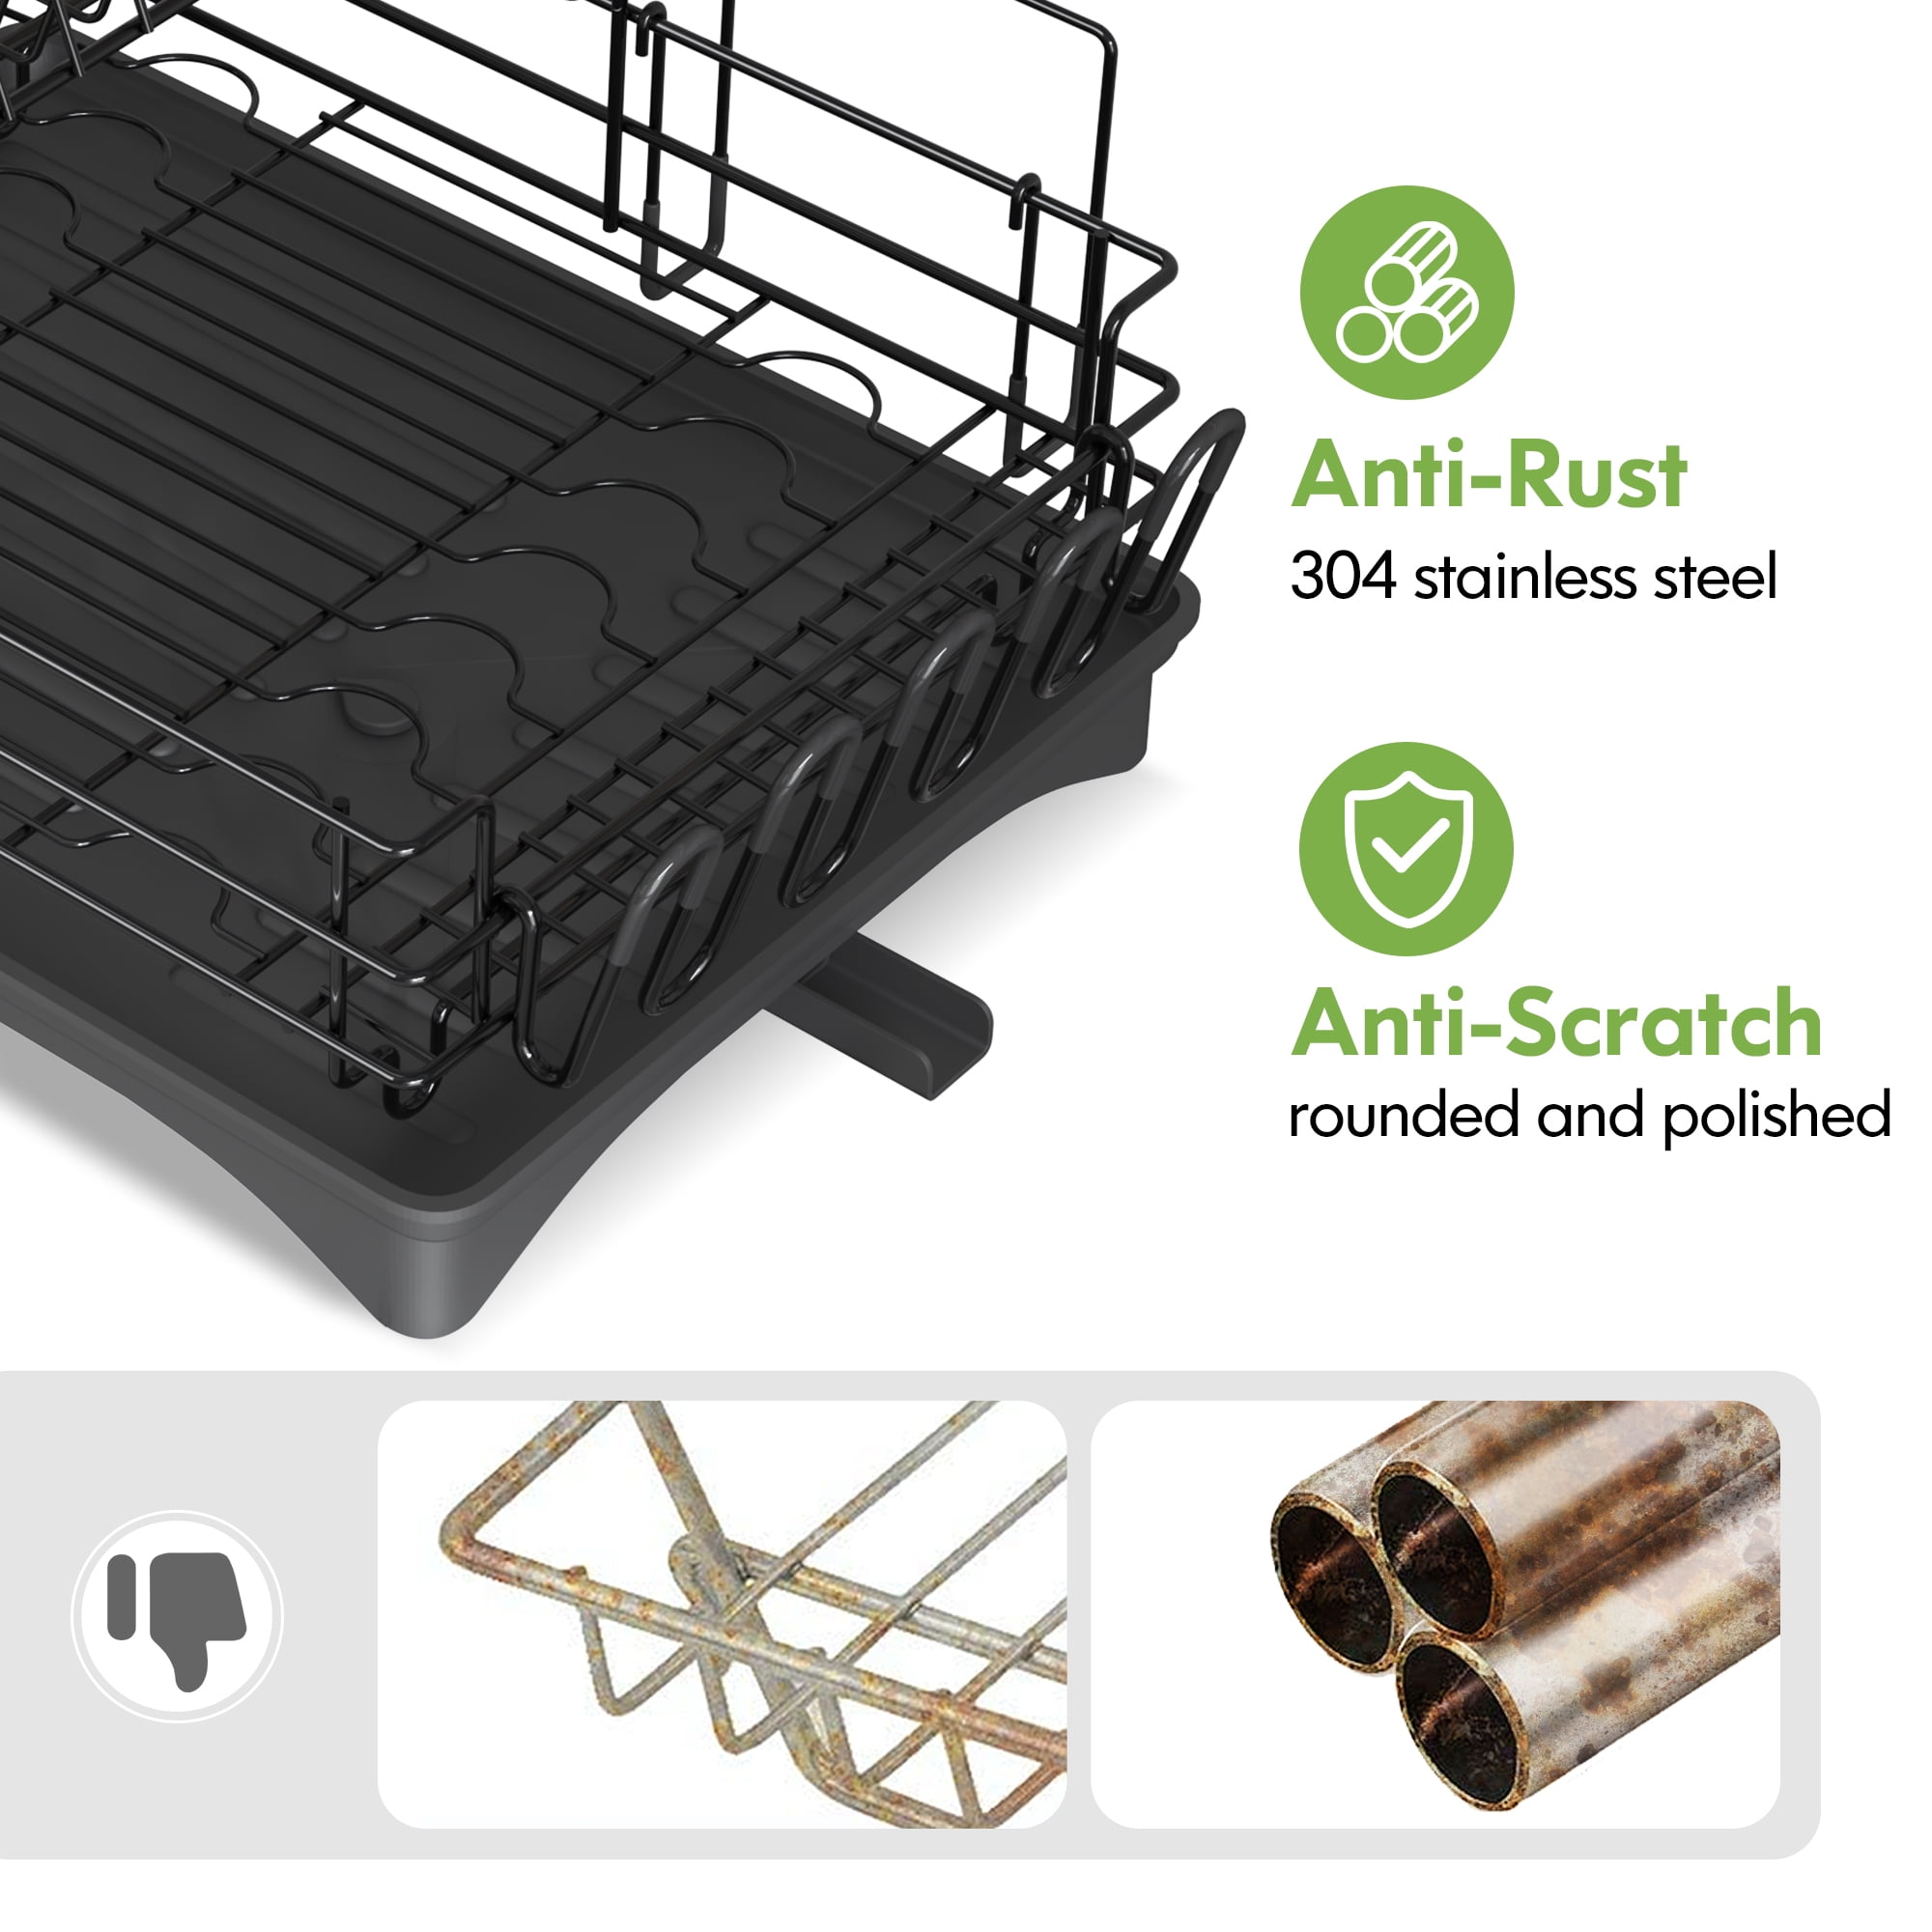 MAJALiS Over The Sink Dish Drying Rack, Large 3 Tier Nigeria